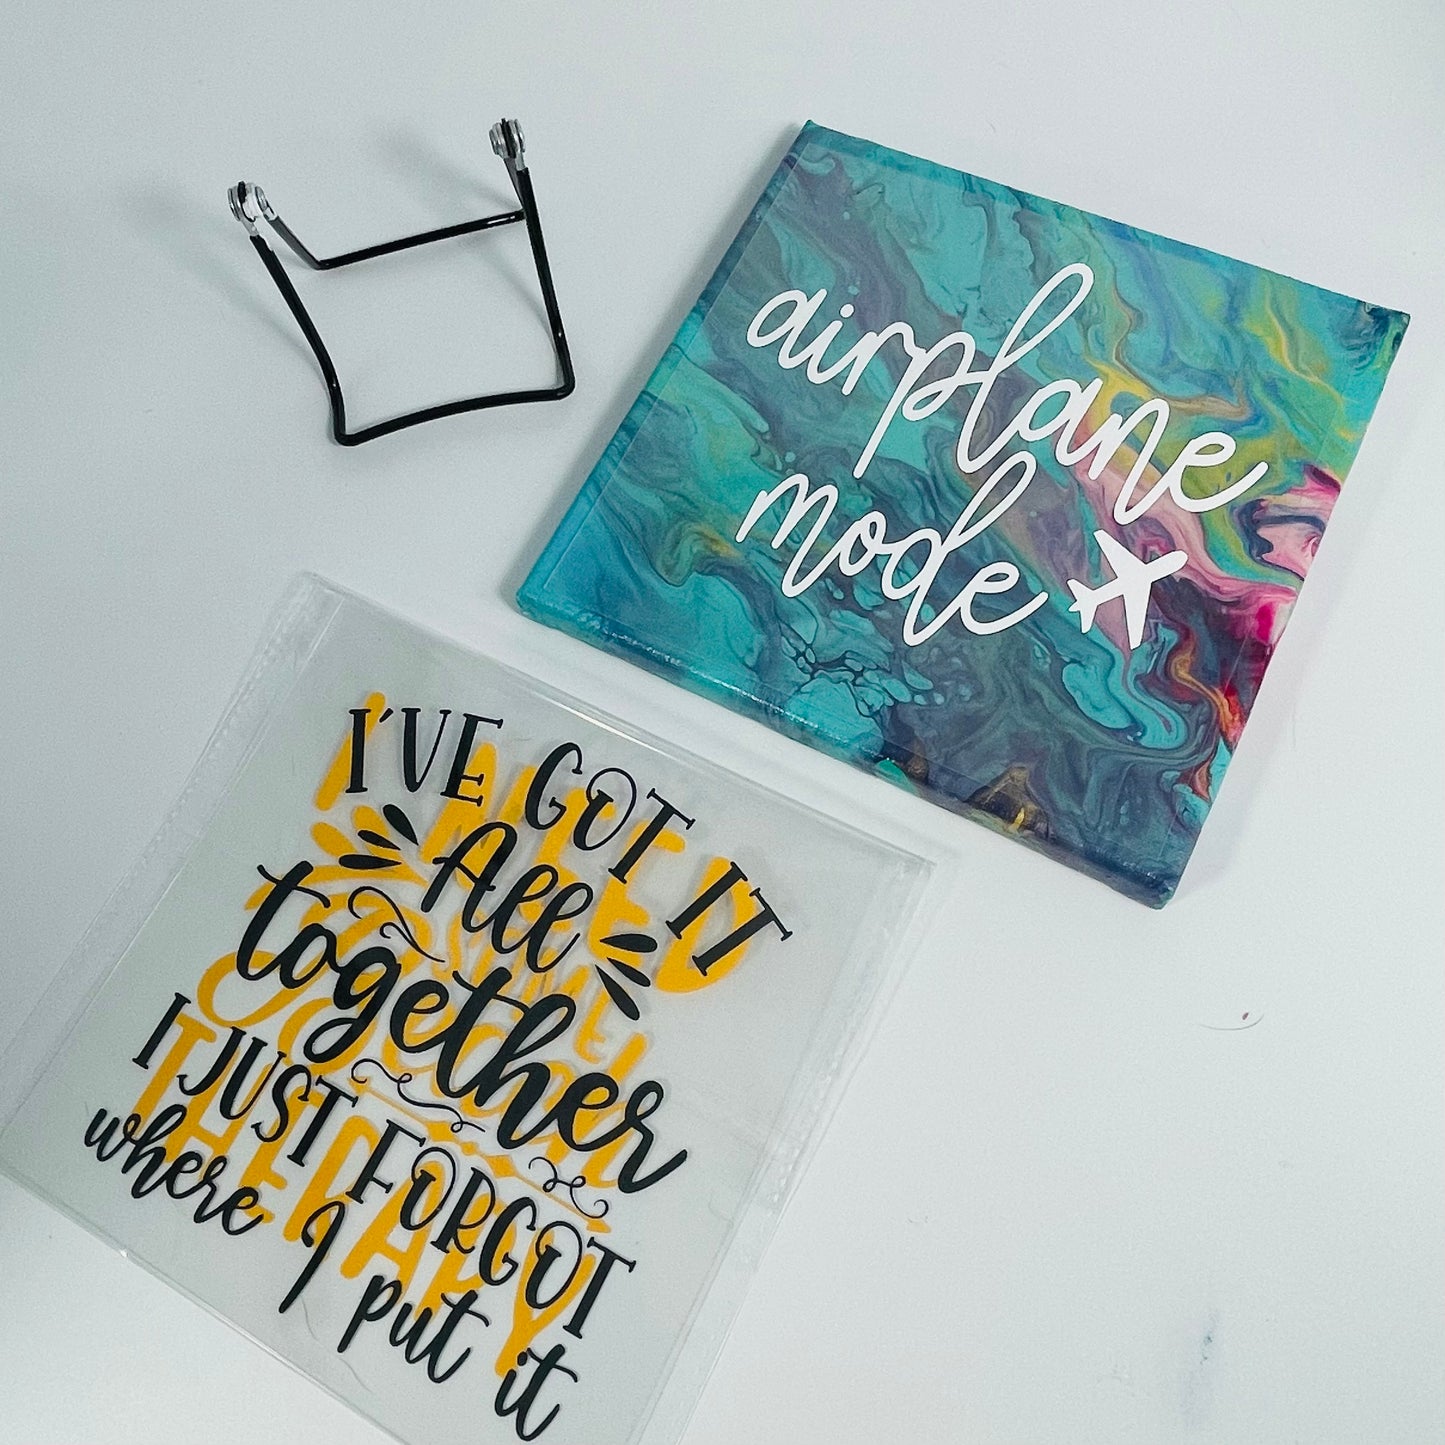 Acrylic Quotes Set 8x8 (choose 3 interchangeable quotes): Cattywampus